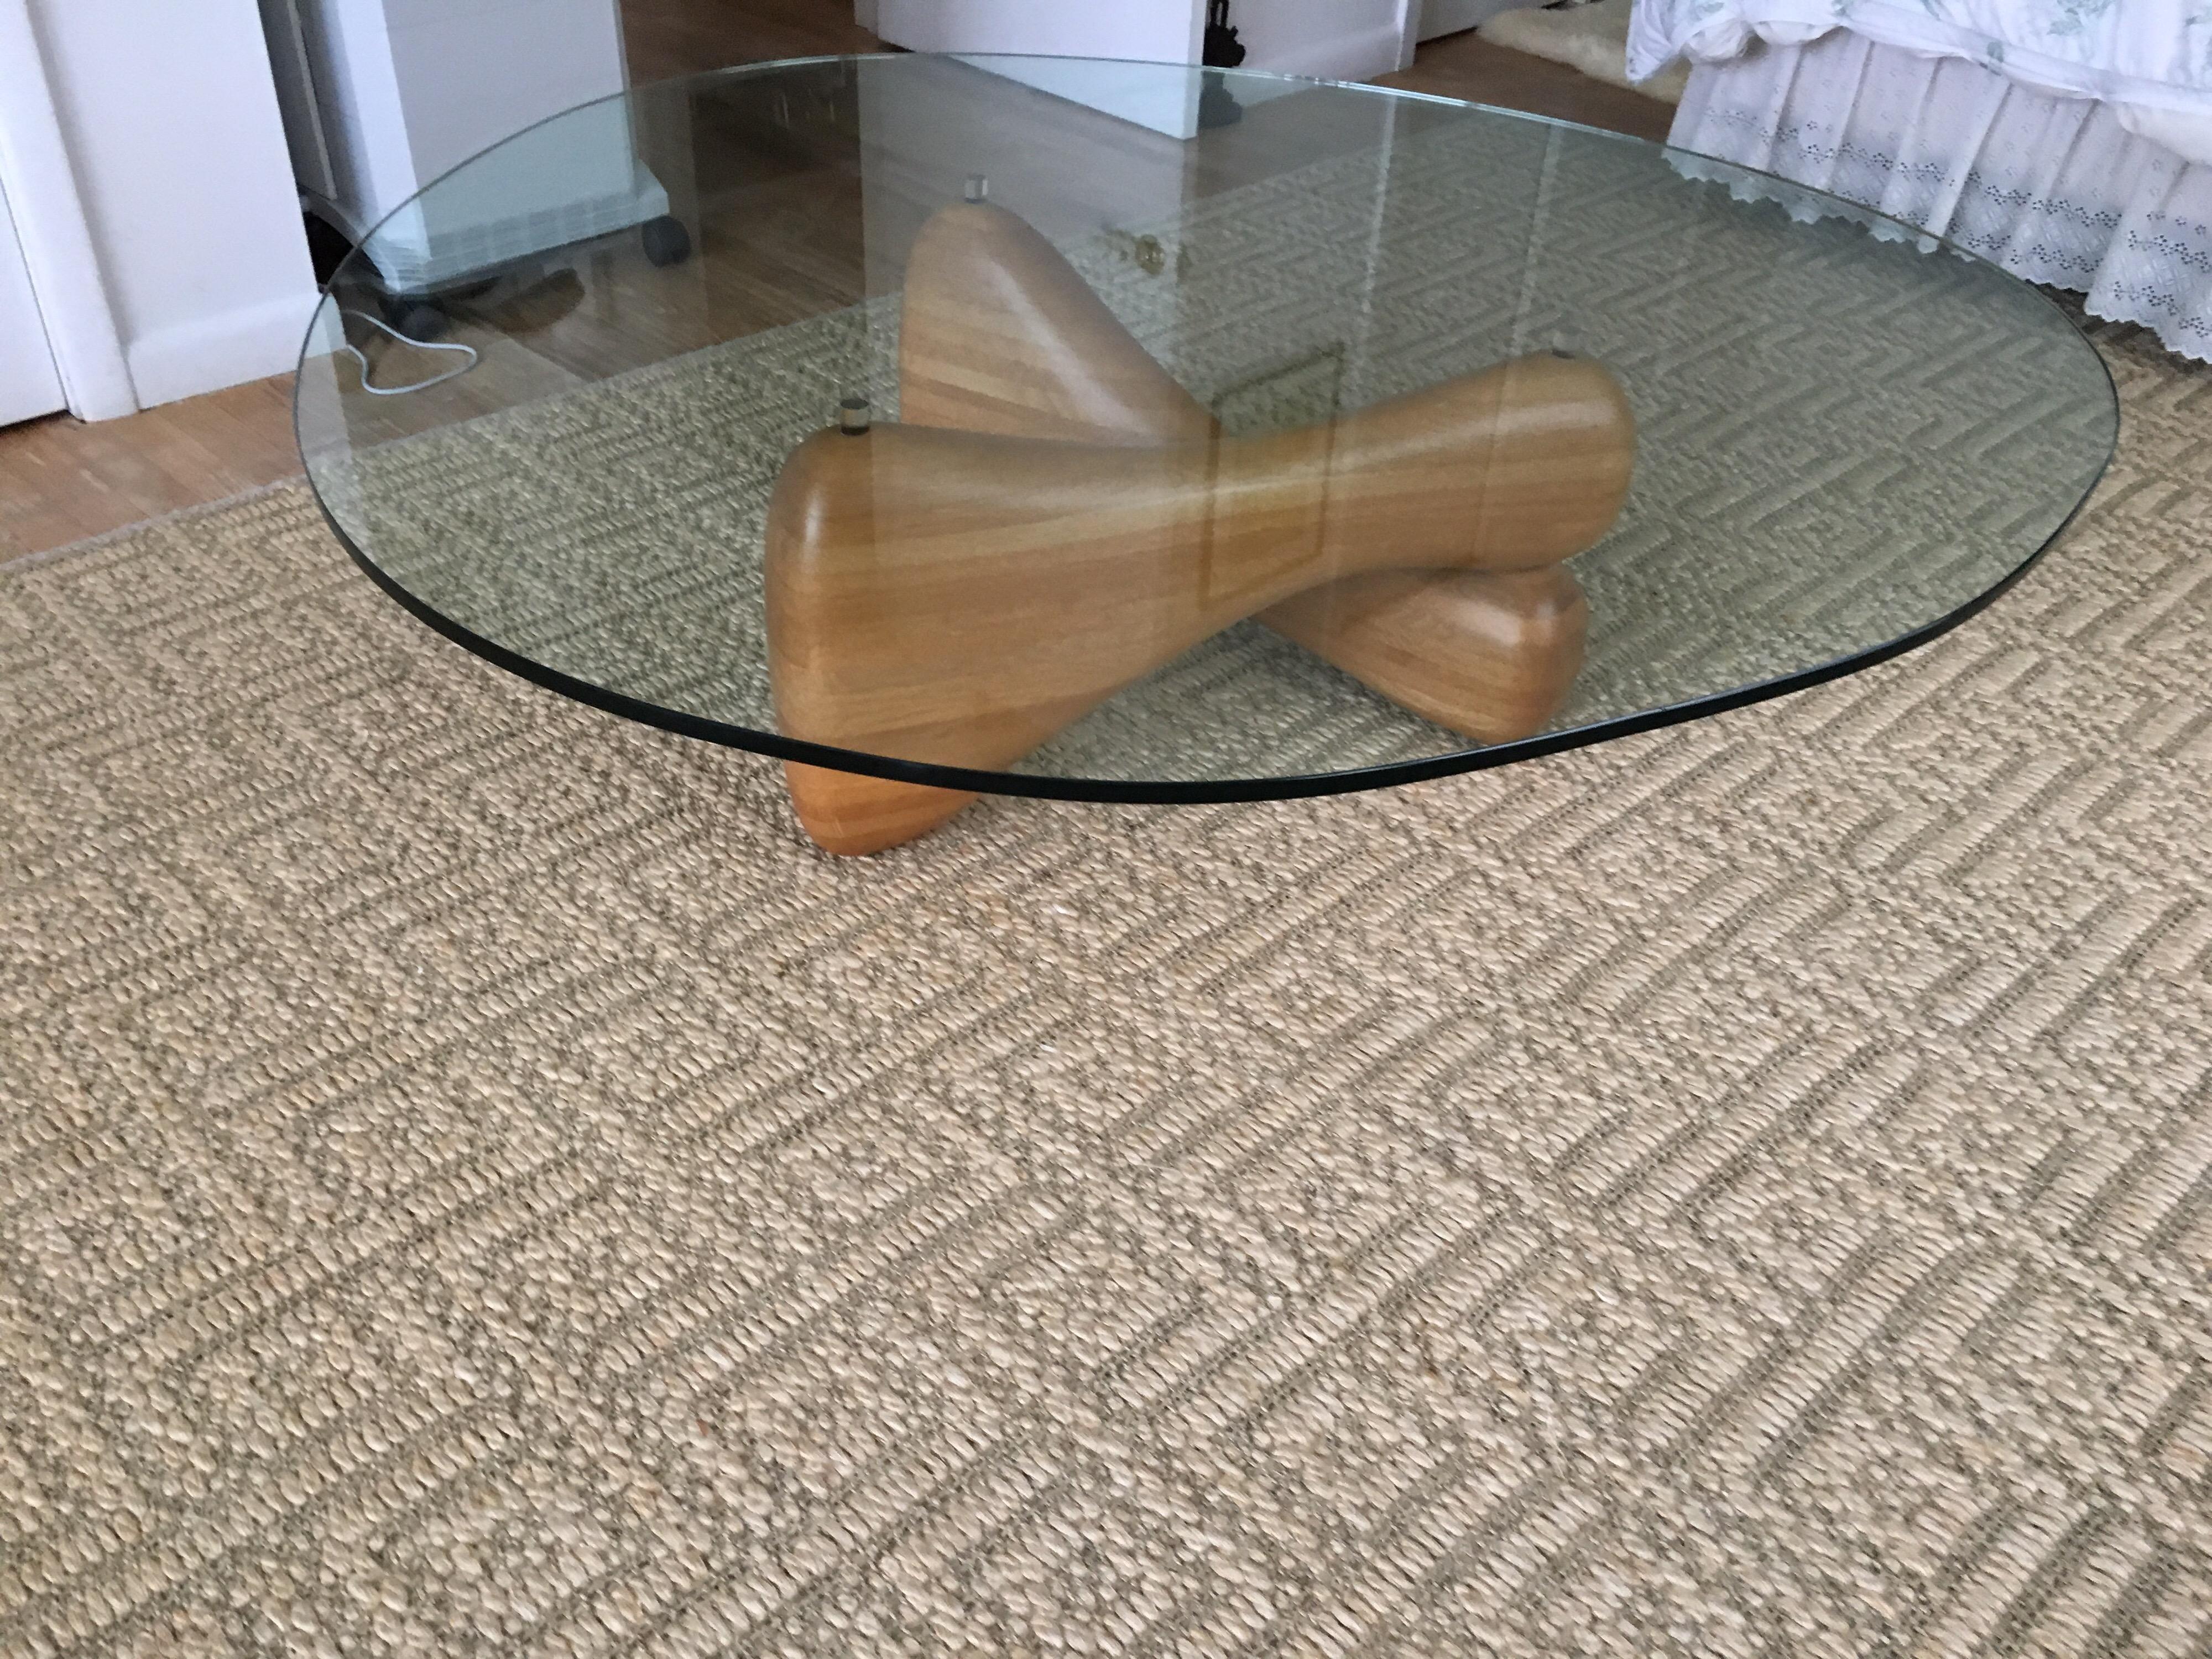 Midcentury Noguchi style biomorphic glass coffee table. This 1970s biomorphic, sculptural coffee table, in the style of Isamu Noguchi.
Articulating biomorphic wood shaped base with plexi mounts to hold biomorphic shaped glass top.
Originally